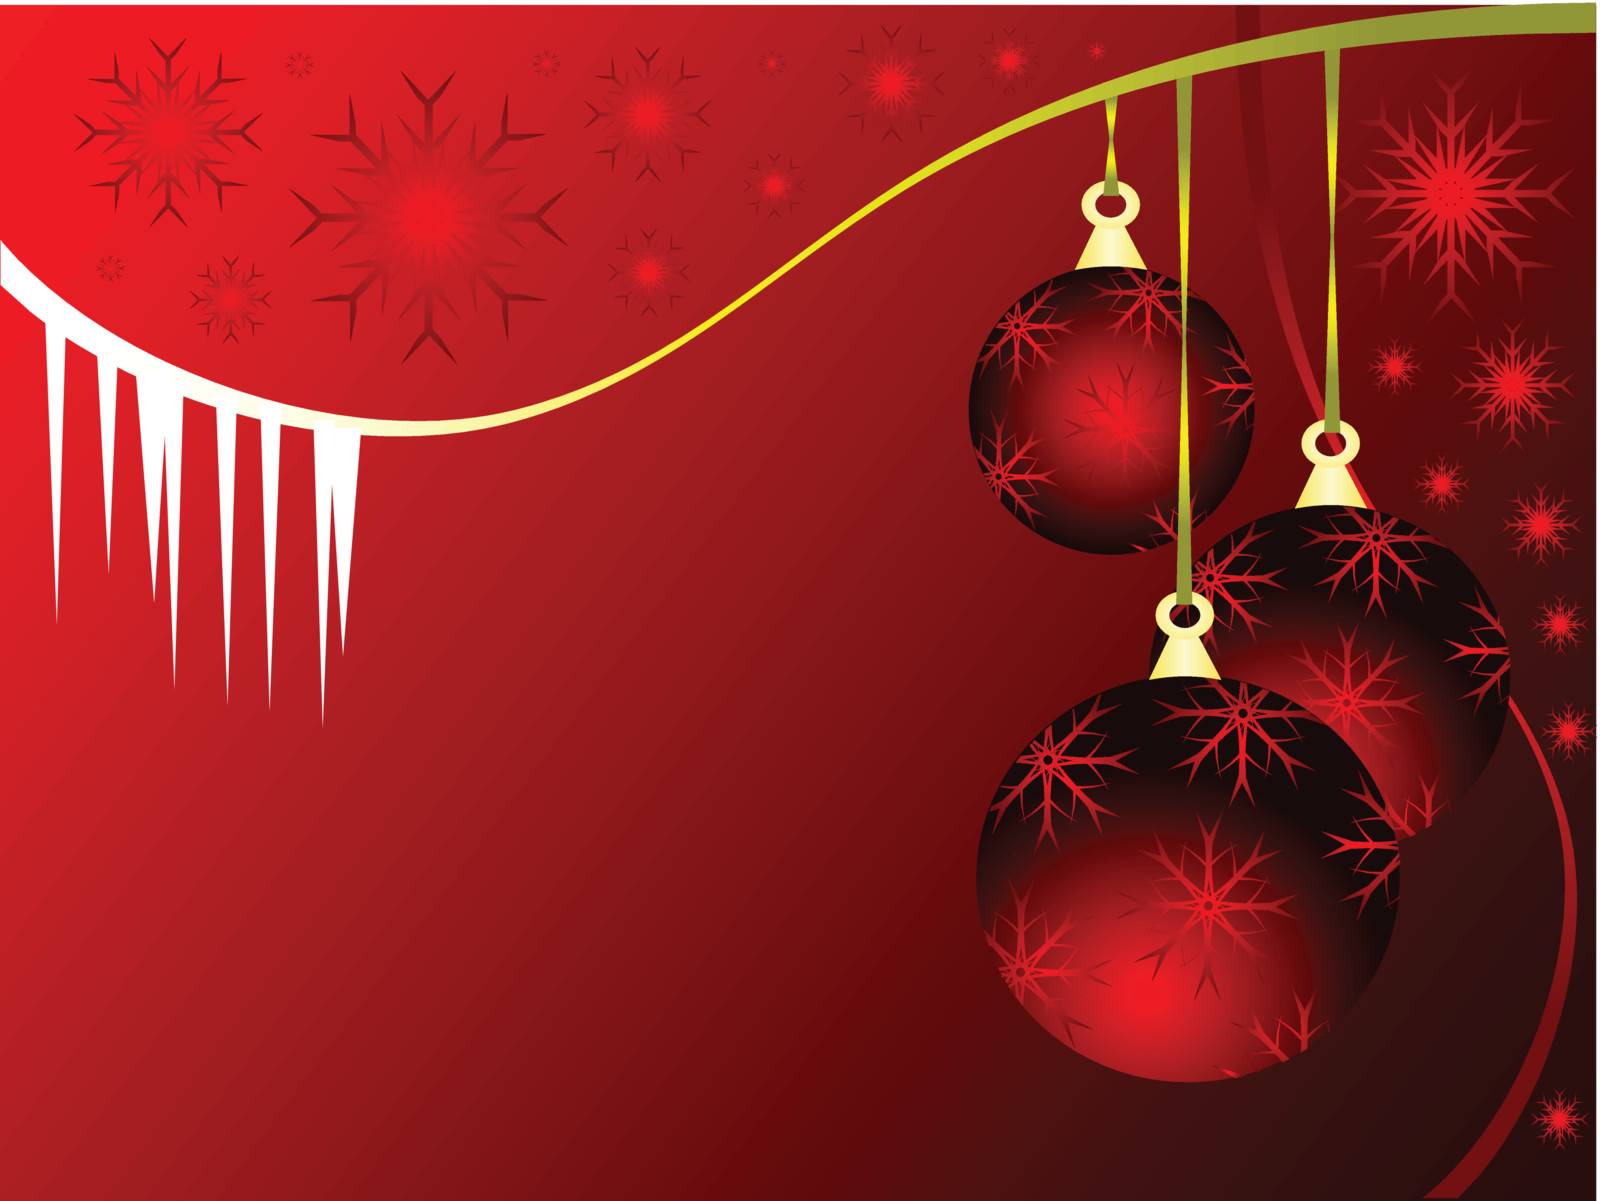 An abstract Christmas vector illustration with red baubles on a darker backdrop with white snowflakes and room for text